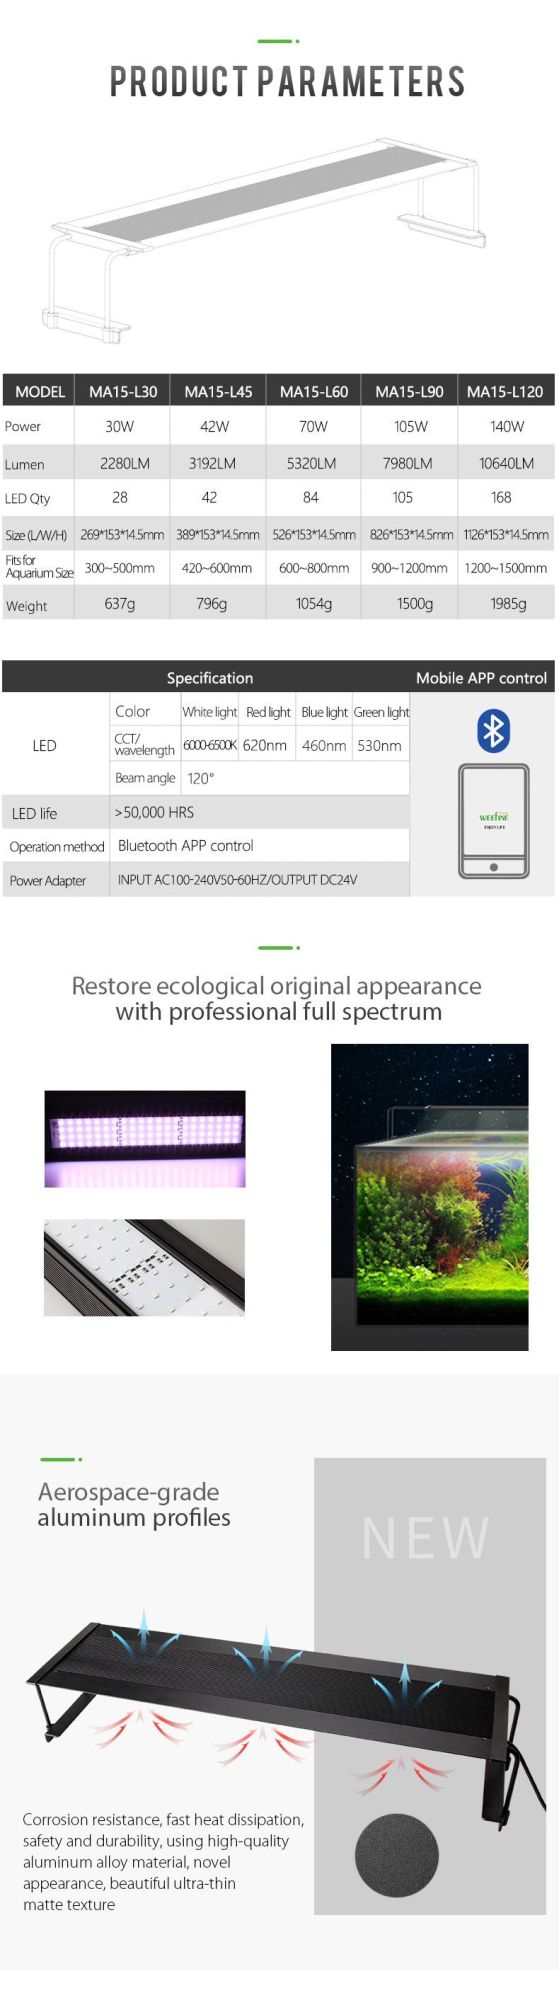 30W Programmable LED Aquarium Light for Coral Reef with Sunset and Sunrise Mode (MA15)